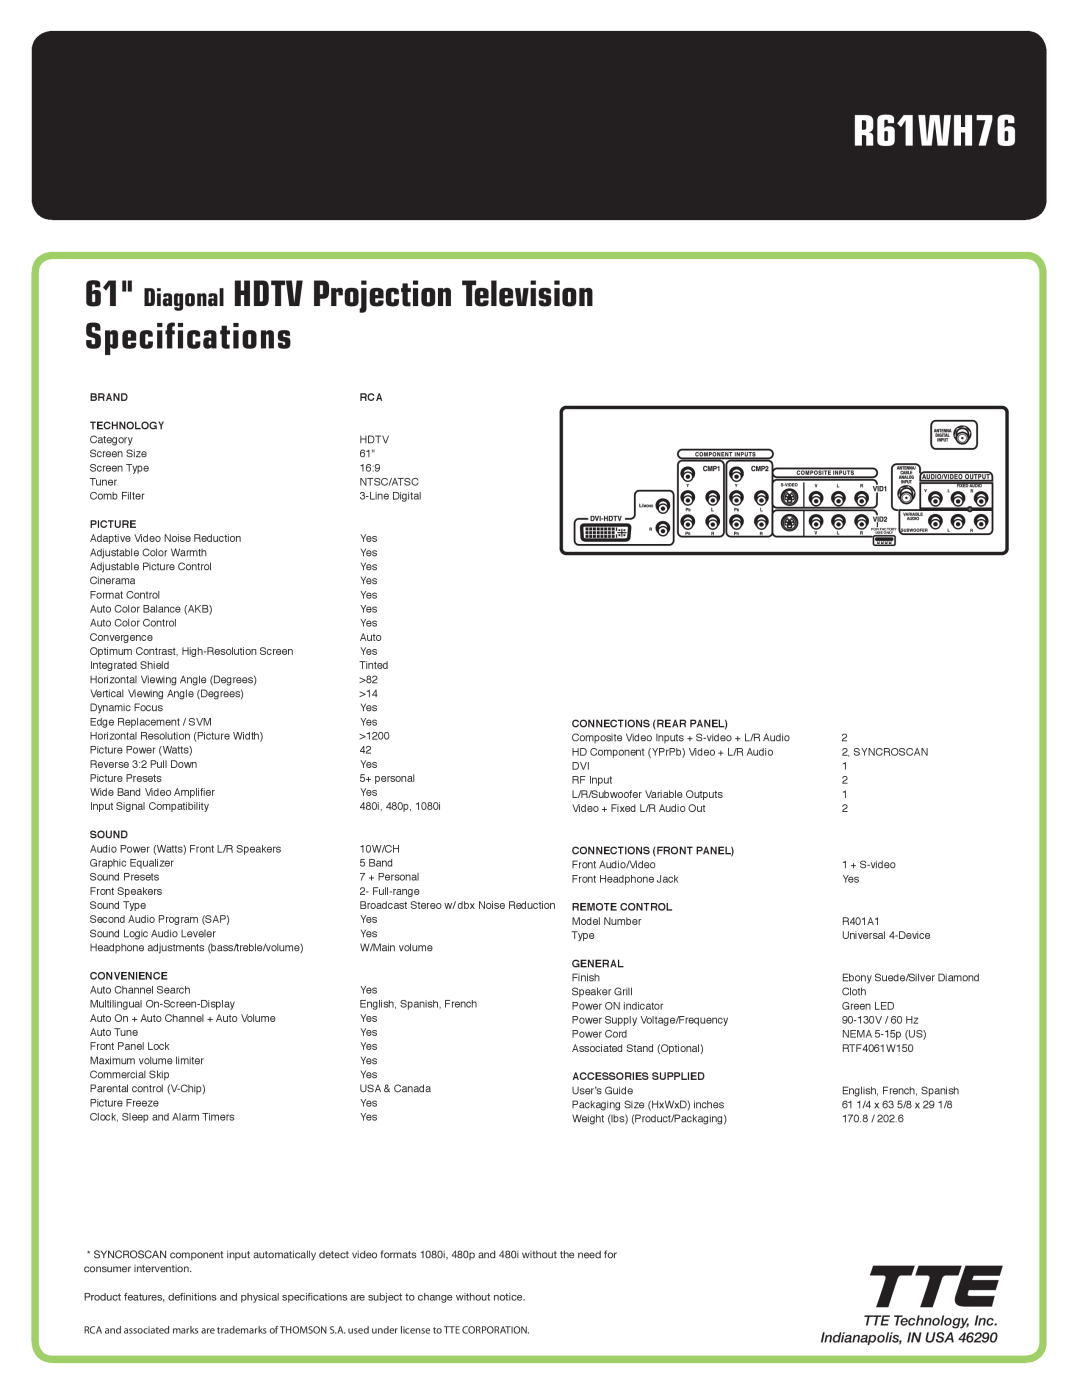 RCA R61WH76 manual Diagonal HDTV Projection Television Specifications, TTE Technology, Inc. Indianapolis, IN USA 